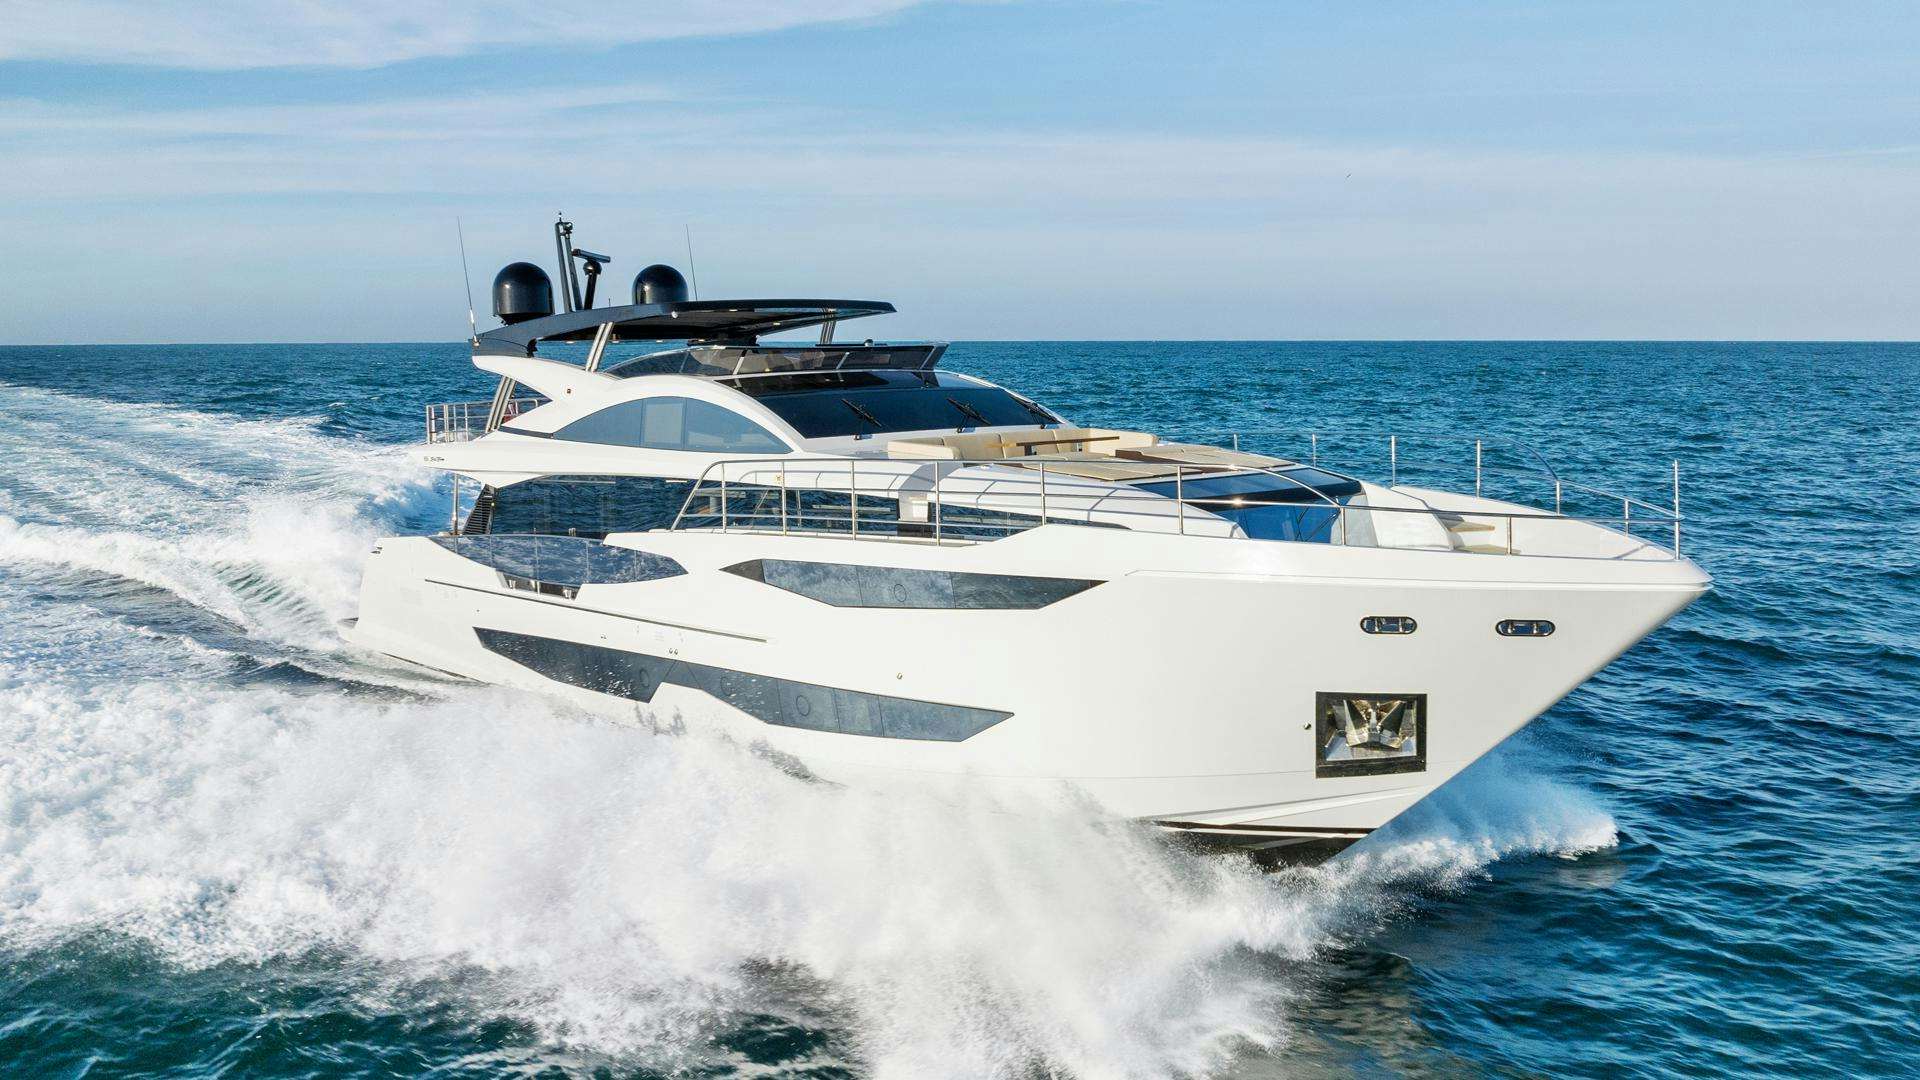 Pearl 95/05
Yacht for Sale